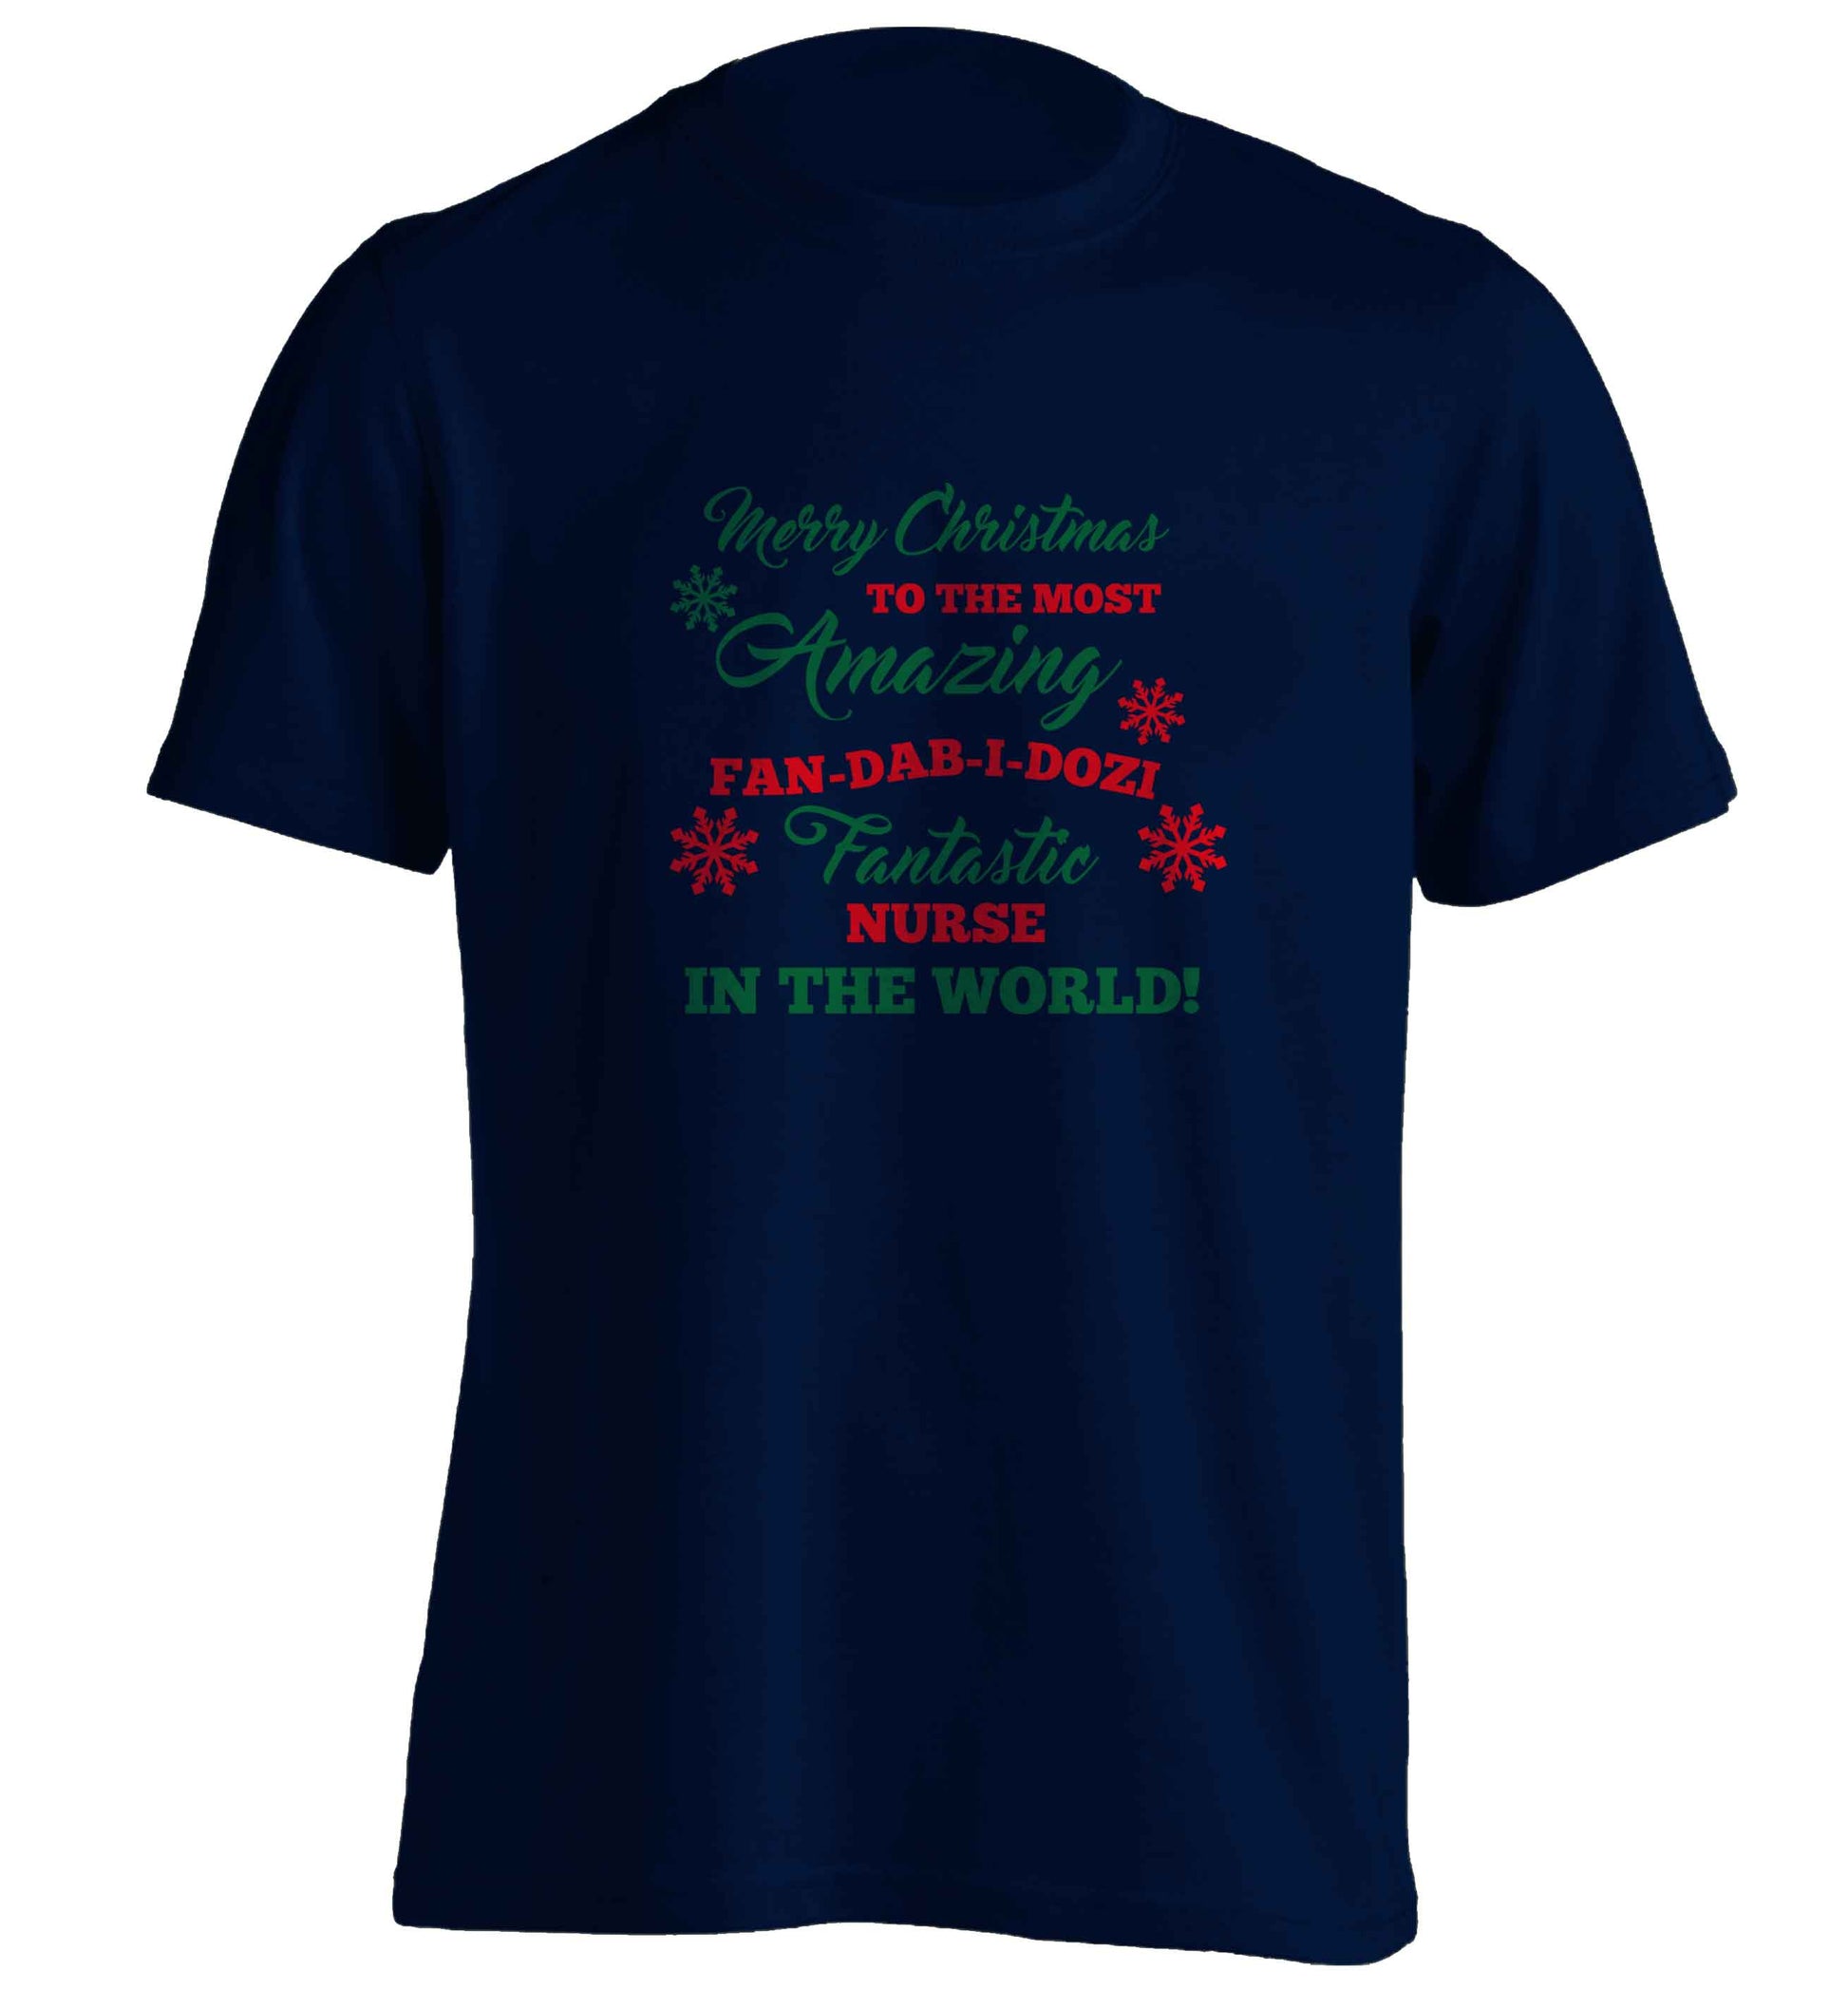 Merry Christmas to the most amazing nurse in the world! adults unisex navy Tshirt 2XL